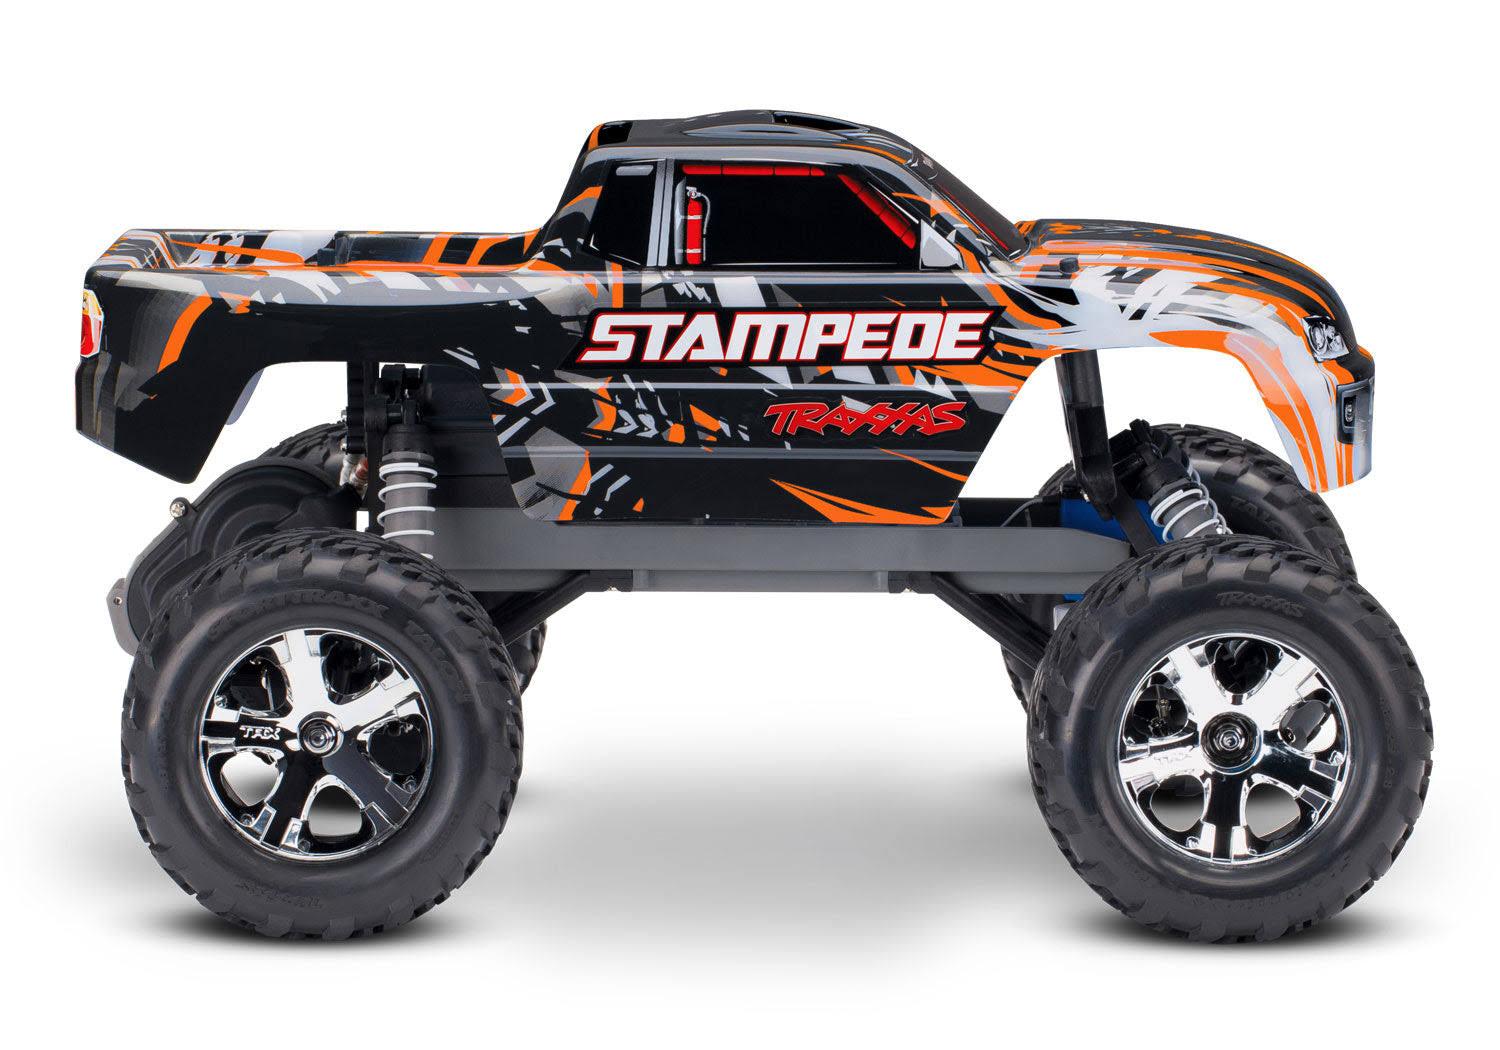 Traxxas 1/10 Stampede 2WD Monster Truck - Red